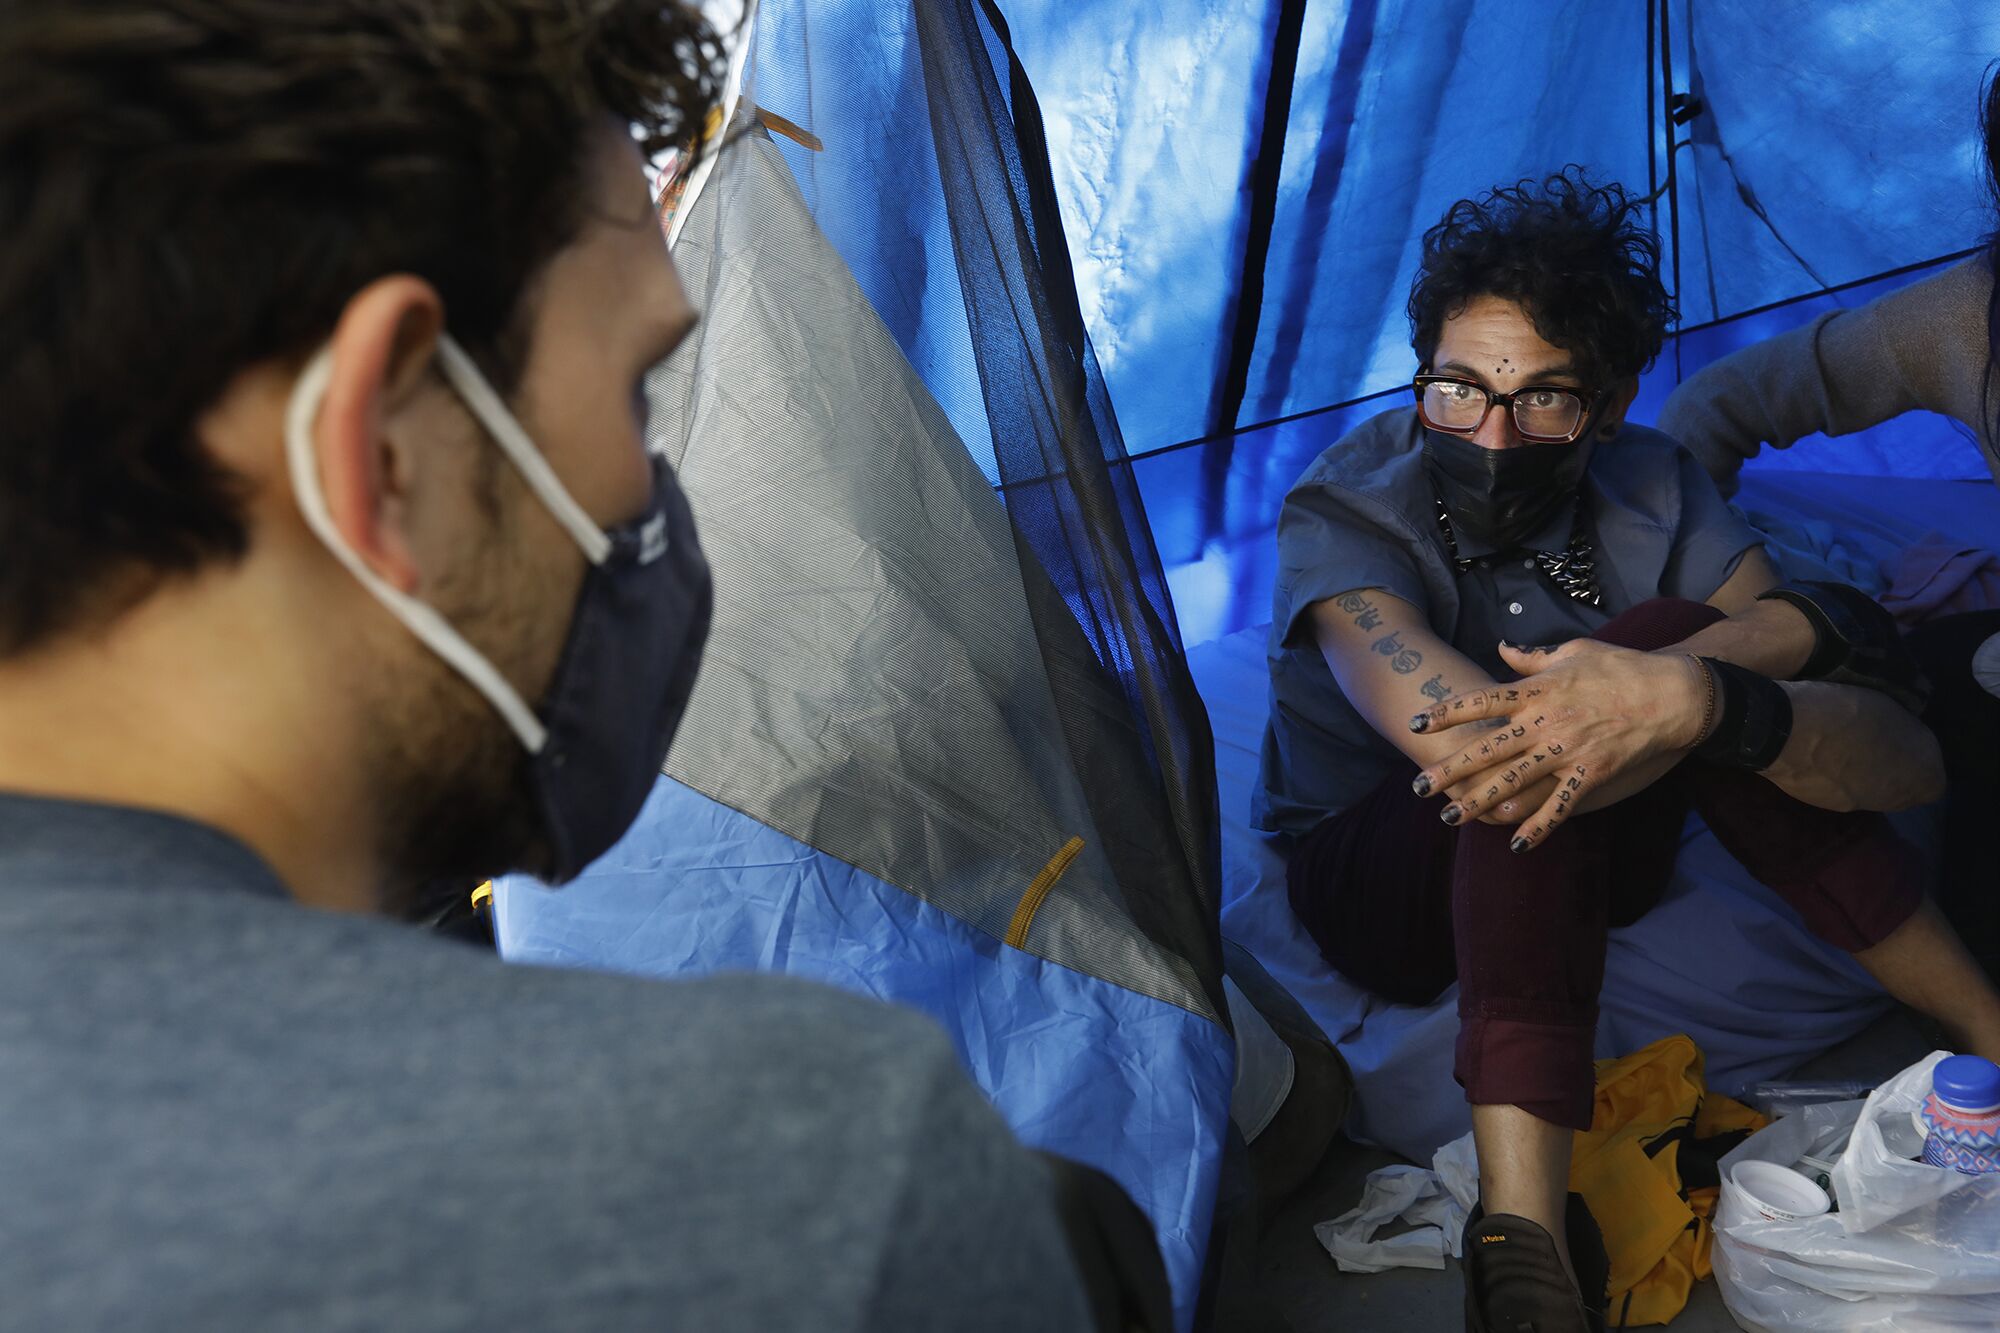 SELAH outreach worker Nick Marcone speaks to Bobby Rodriguez, who lives in a tent in Echo Park. 